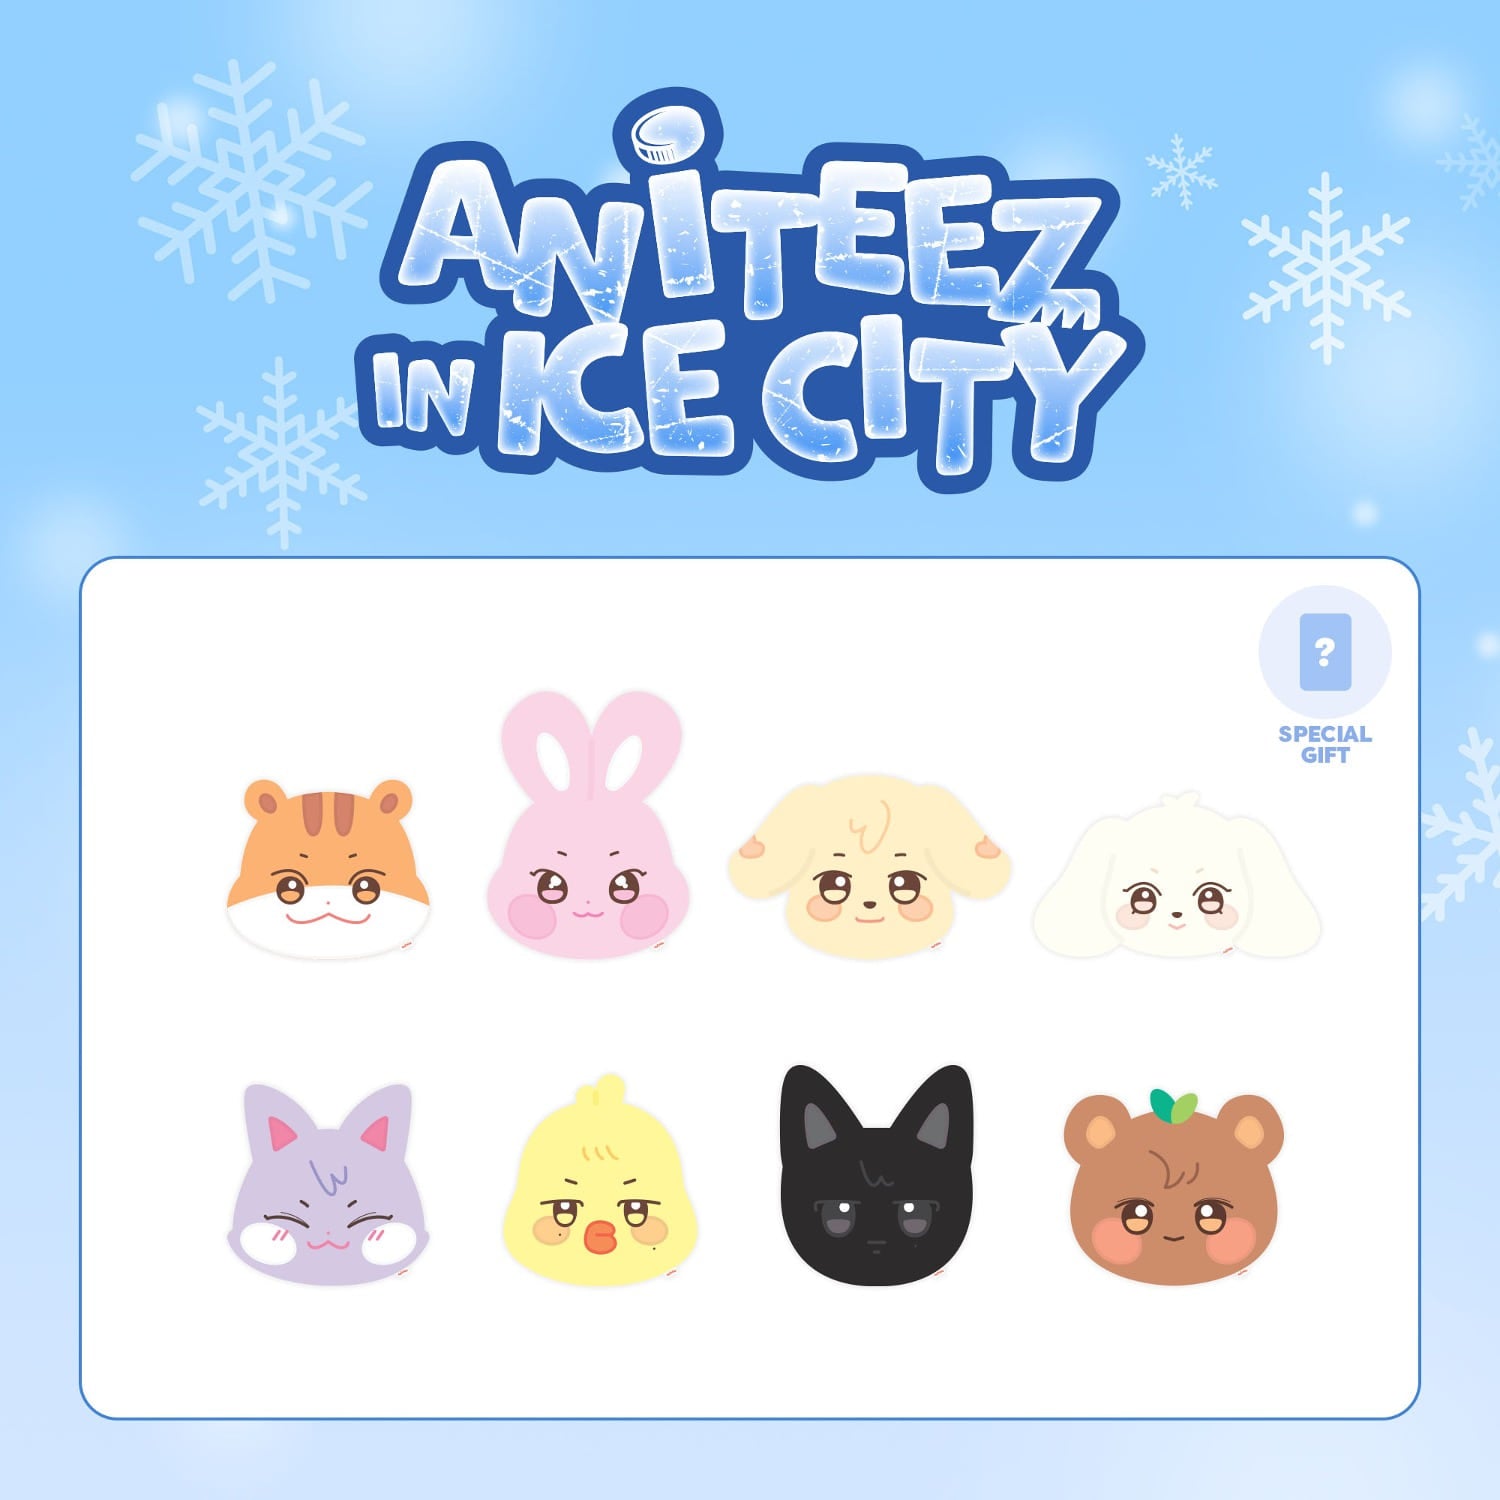 ATEEZ - ATEEZ X ANITEEZ IN ICE CITY OFFICIAL MD FACE CUSHION